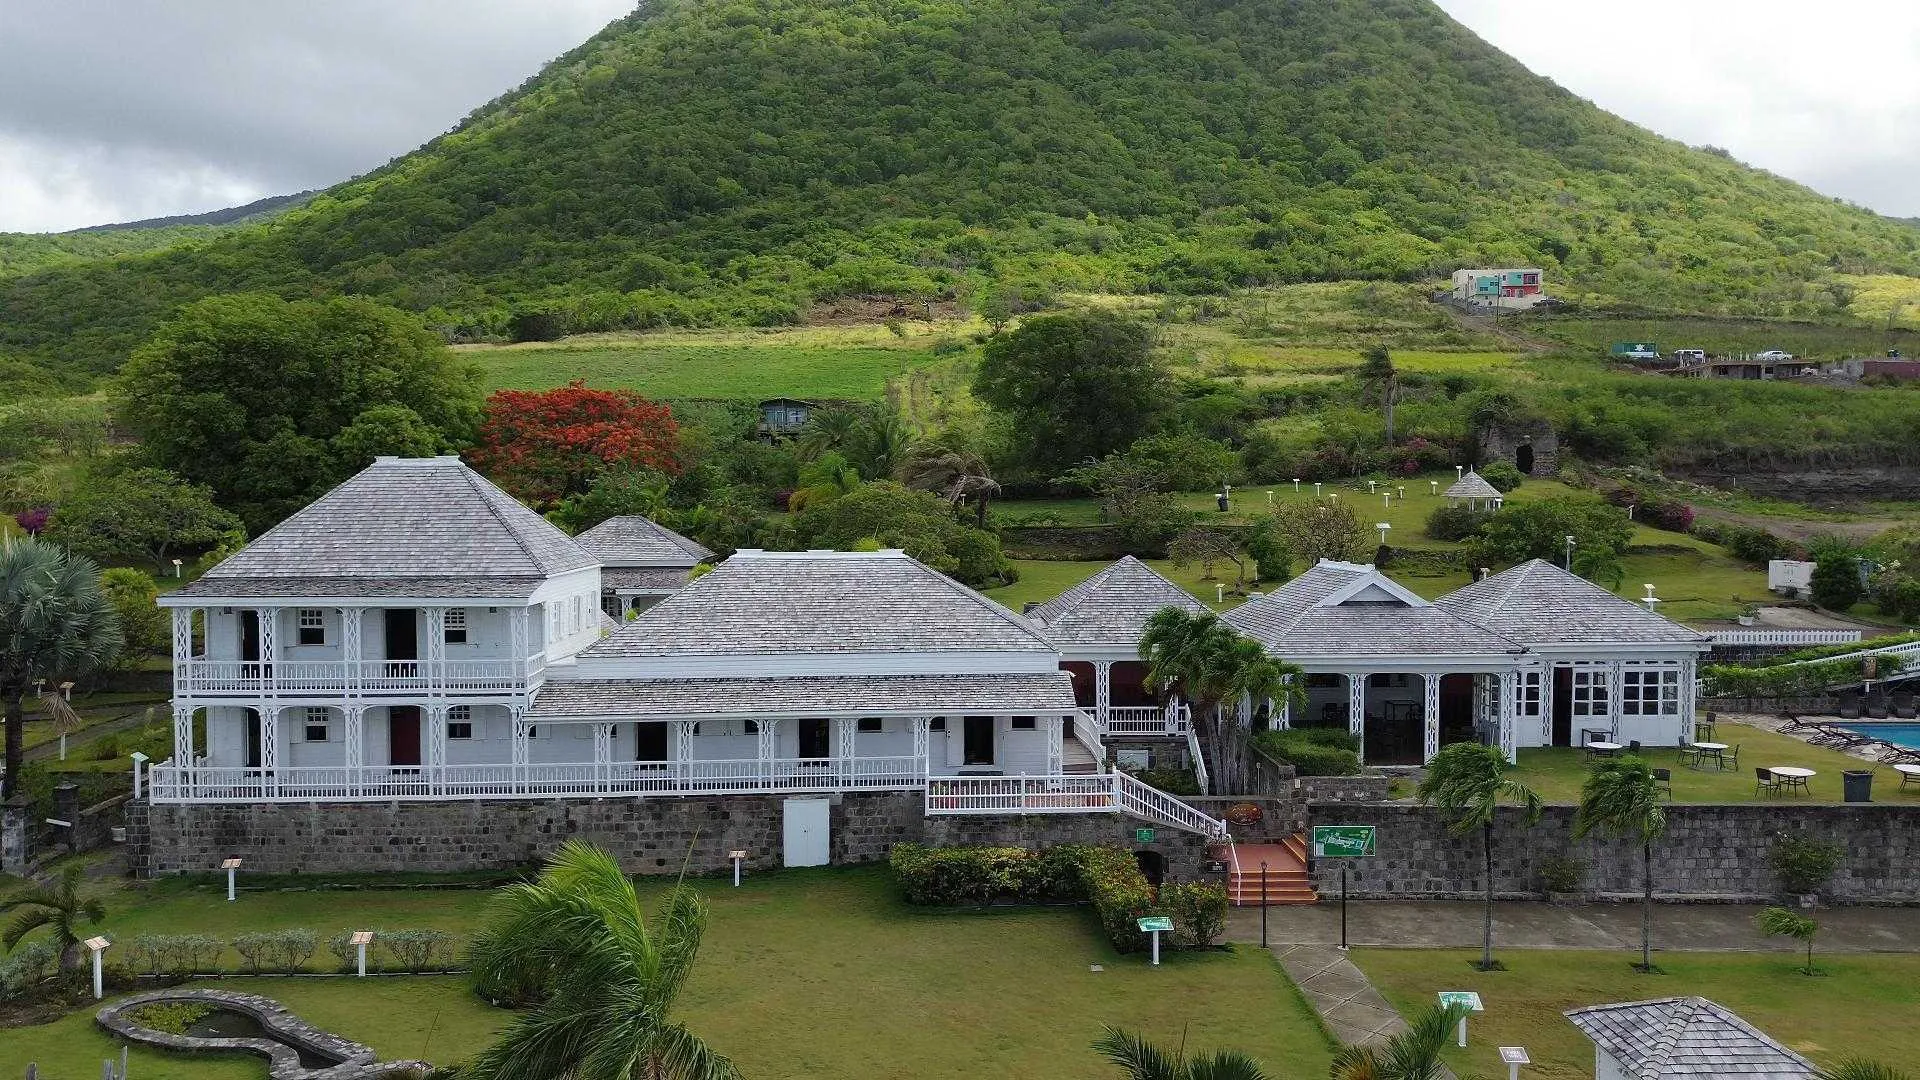 Fairview Great House and Botanical Gardens in Saint Kitts and Nevis, Caribbean | Botanical Gardens - Rated 3.7